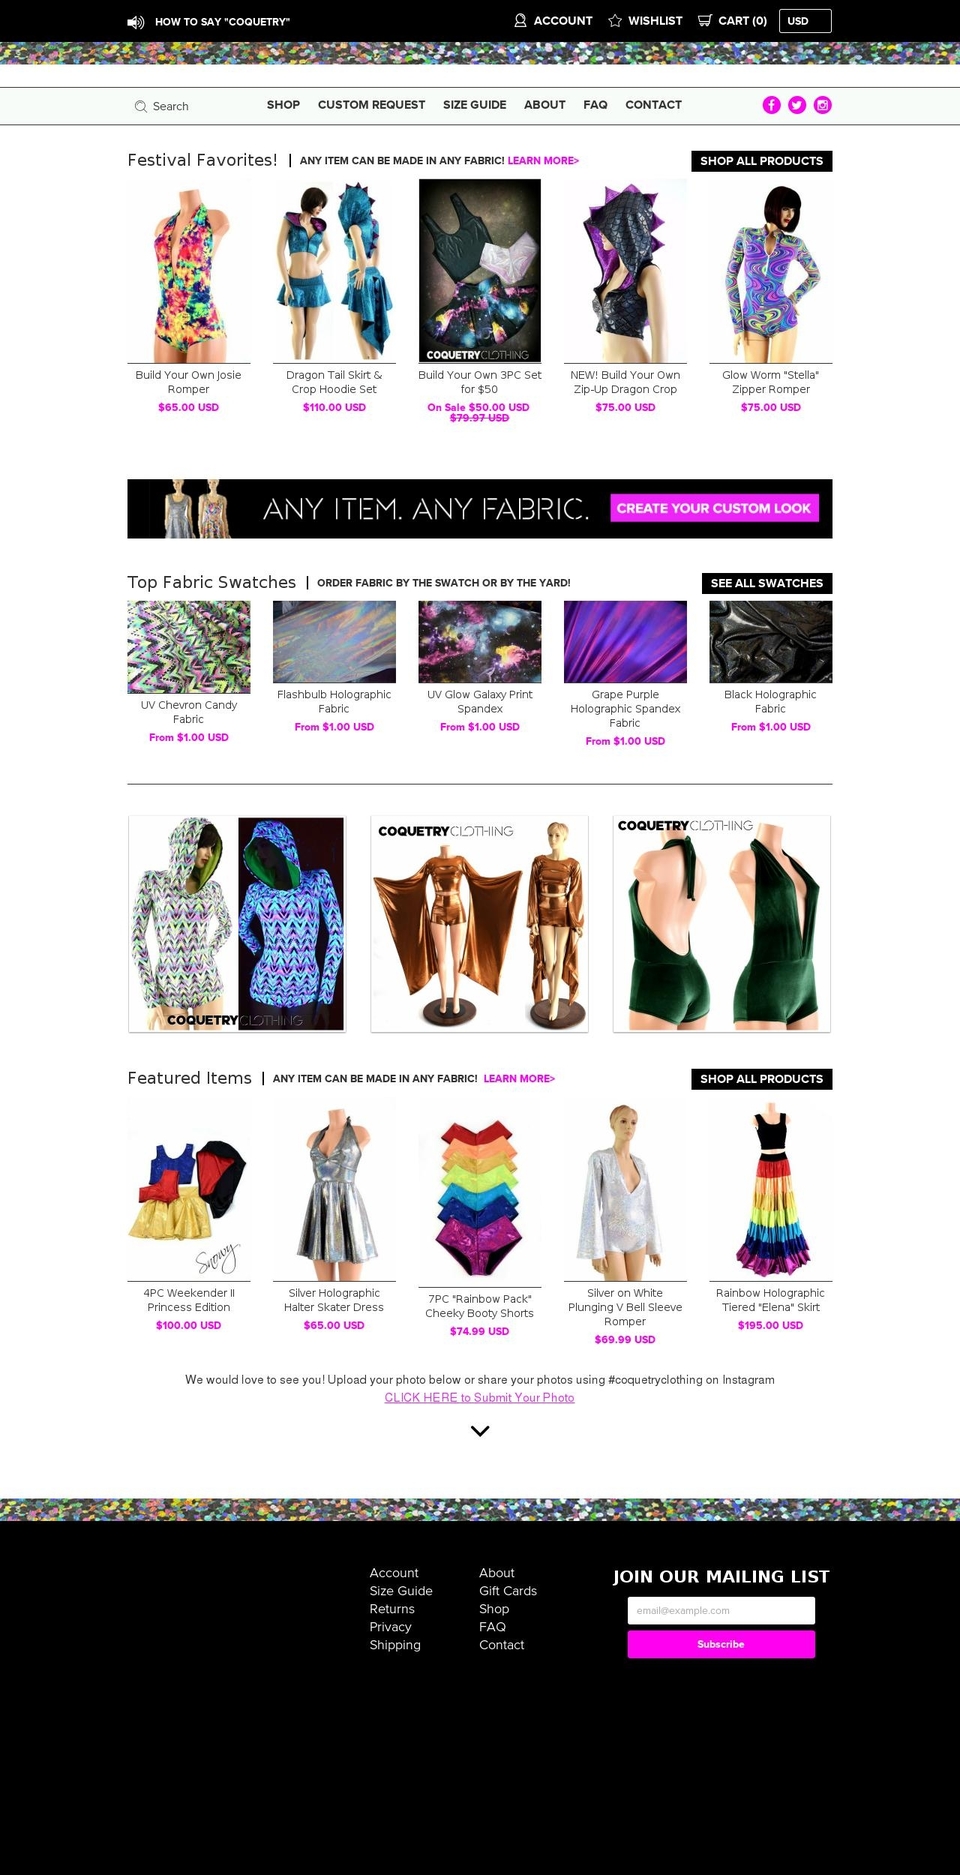 Venue Shopify theme site example coquetryclothing.com